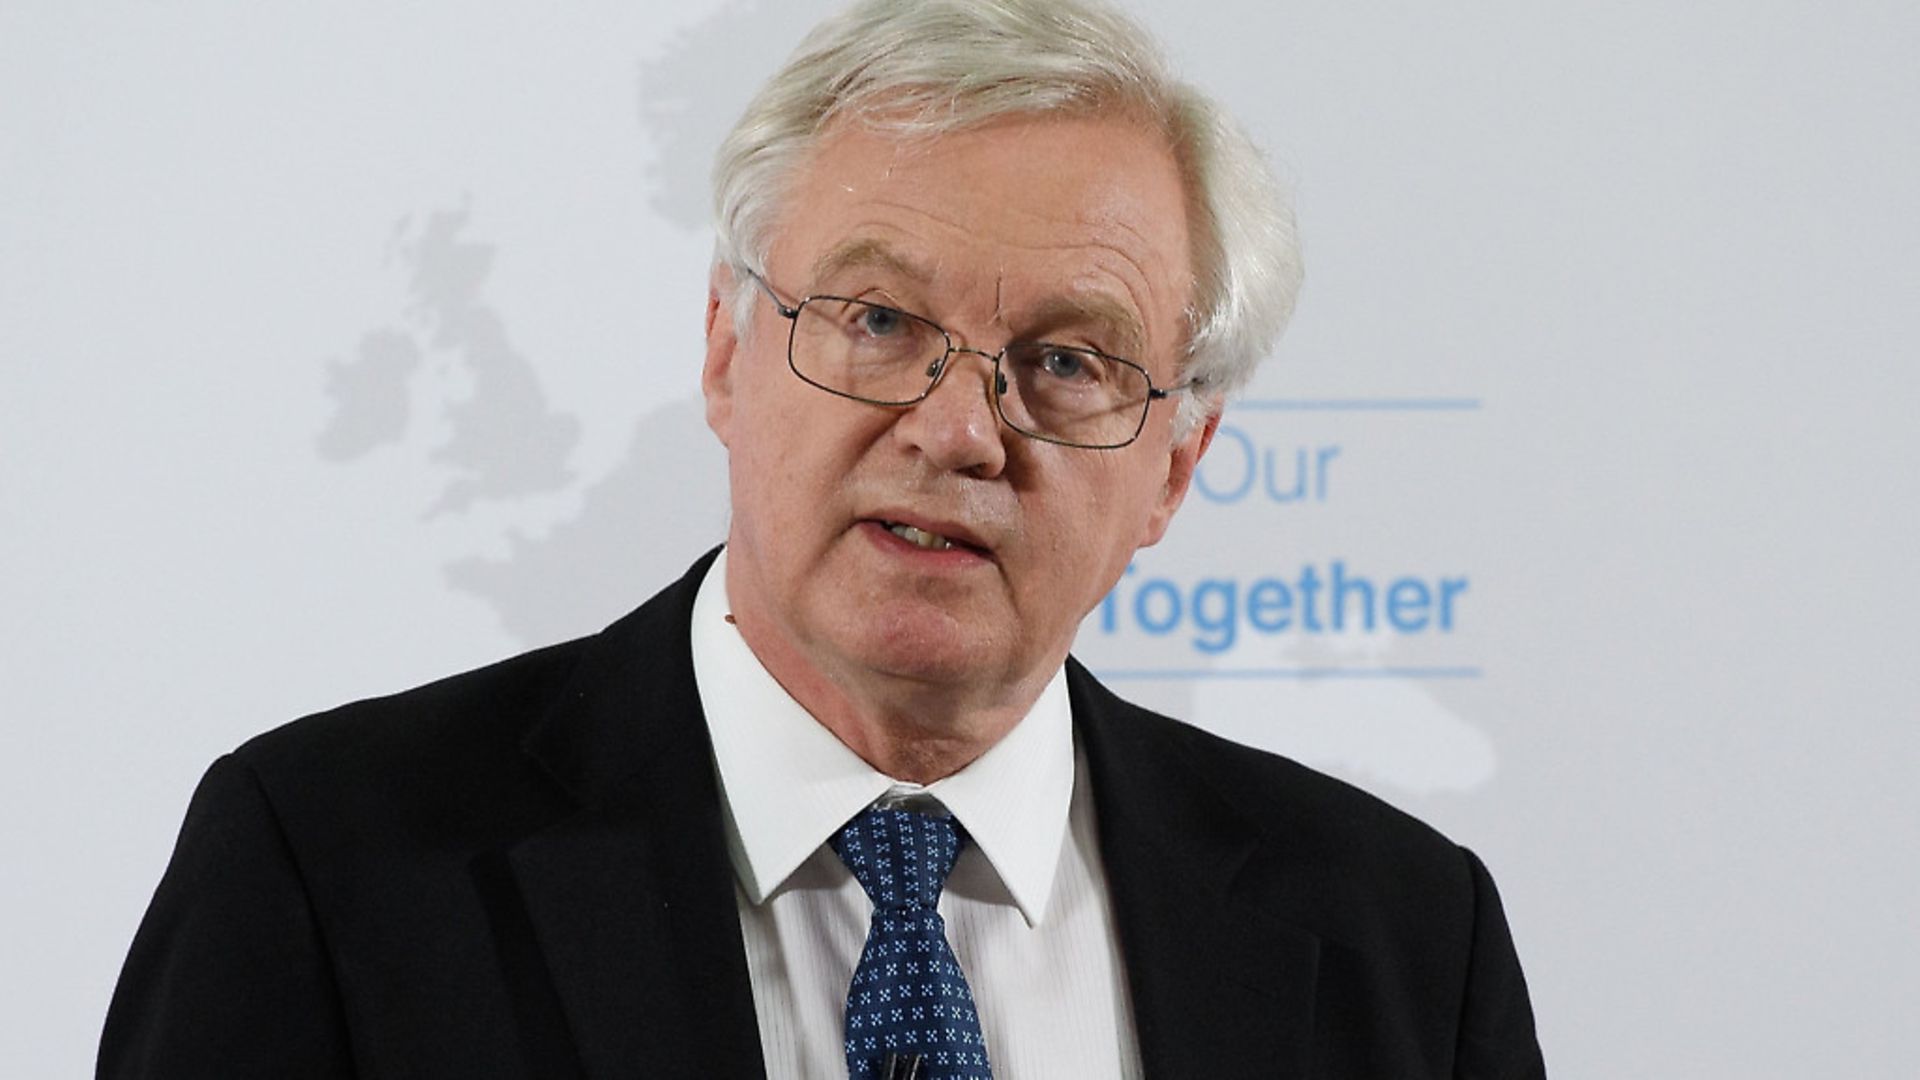 David Davis' departure as Brexit Secretary was even more of anti-climax than many might have imagined. Picture: Leon Neal/PA Wire/PA Images - Credit: PA Wire/PA Images